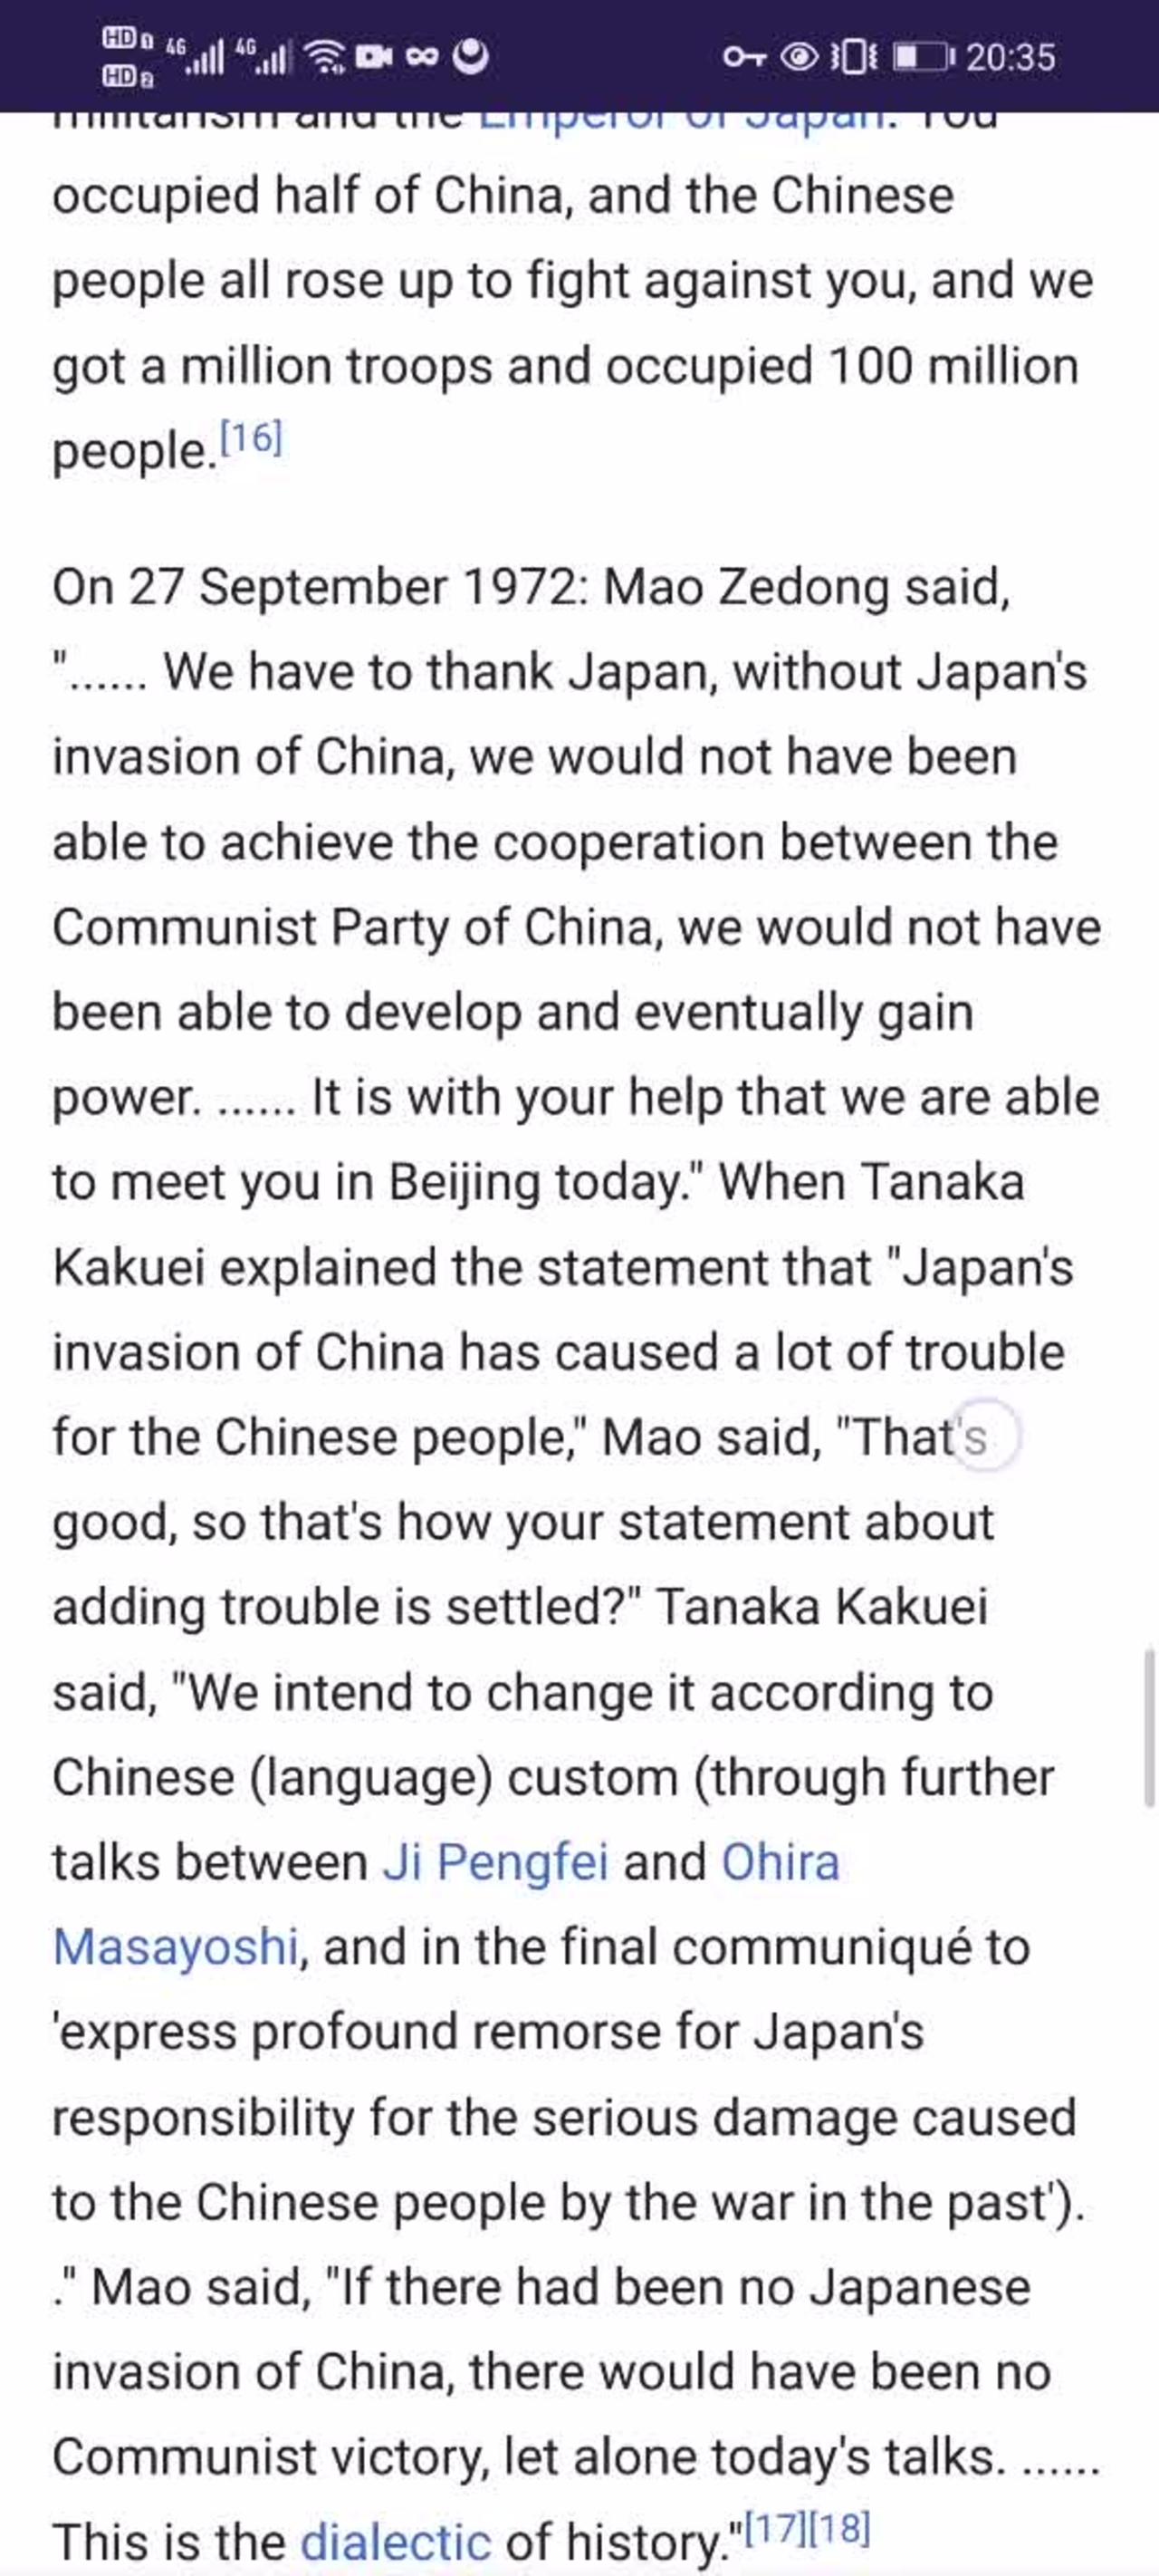 Wikipedia: Mao Zedong thanking Japan controversy